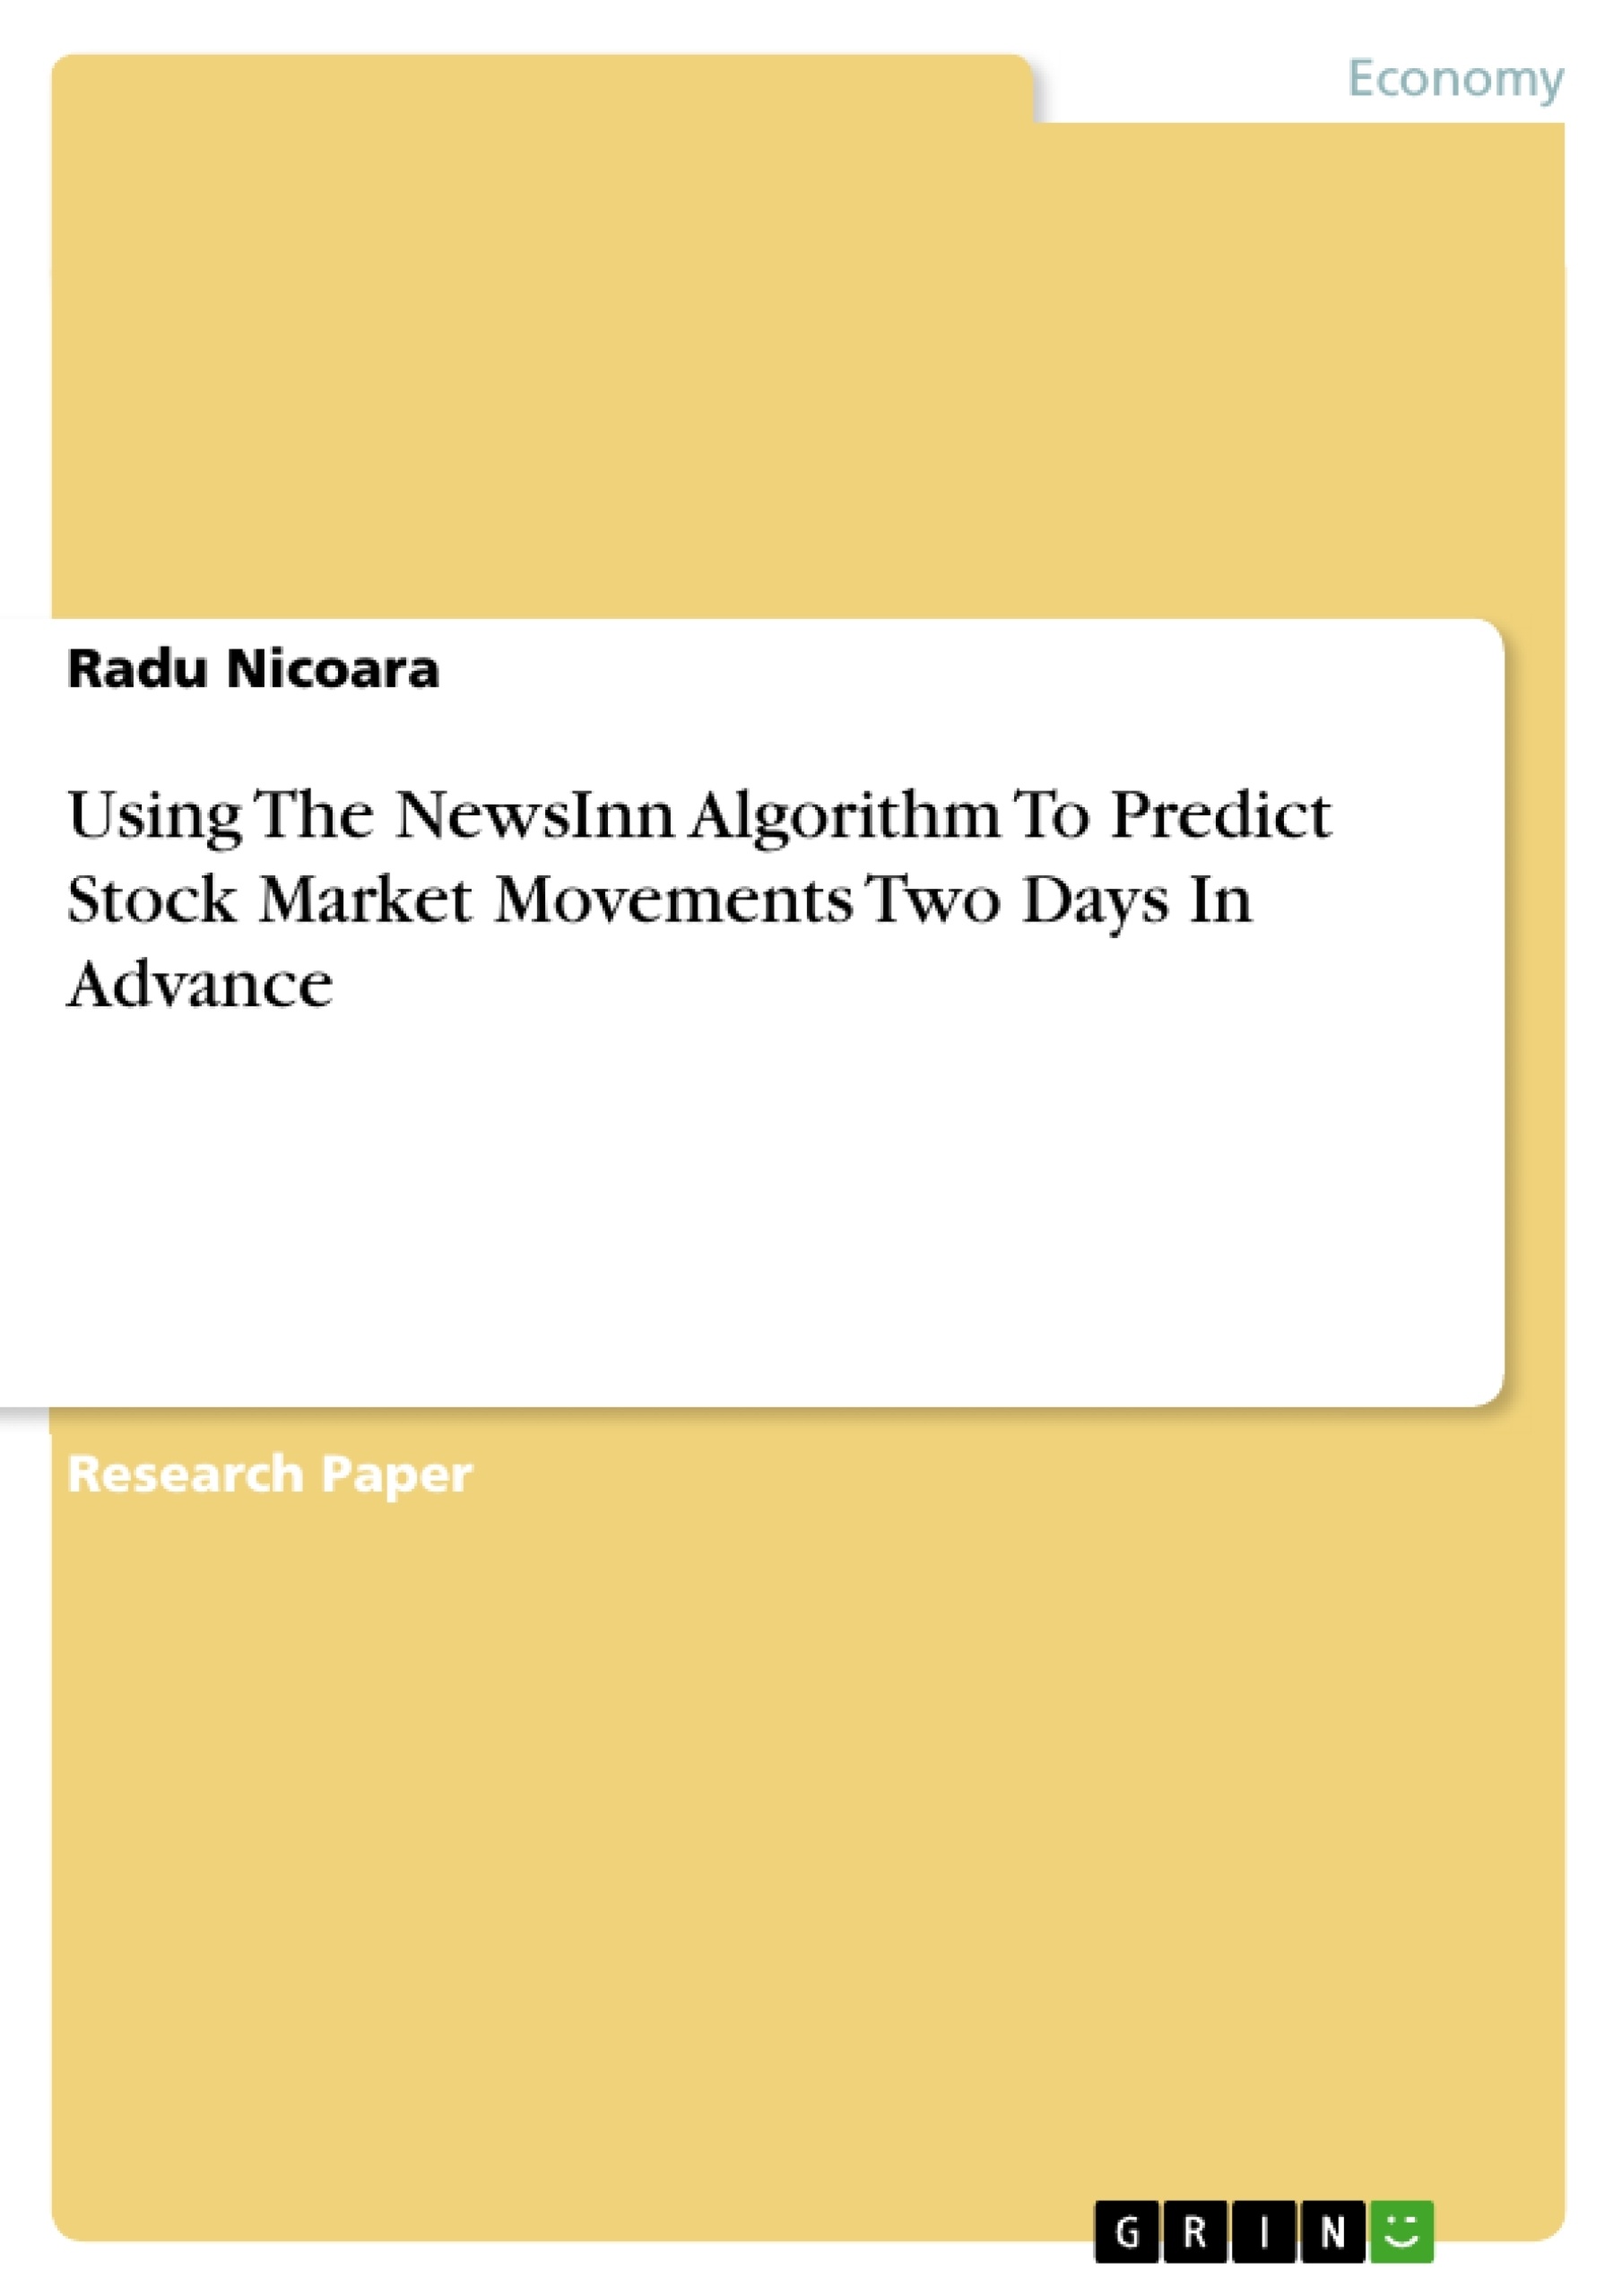 Title: Using The NewsInn Algorithm To Predict Stock Market Movements Two Days In Advance